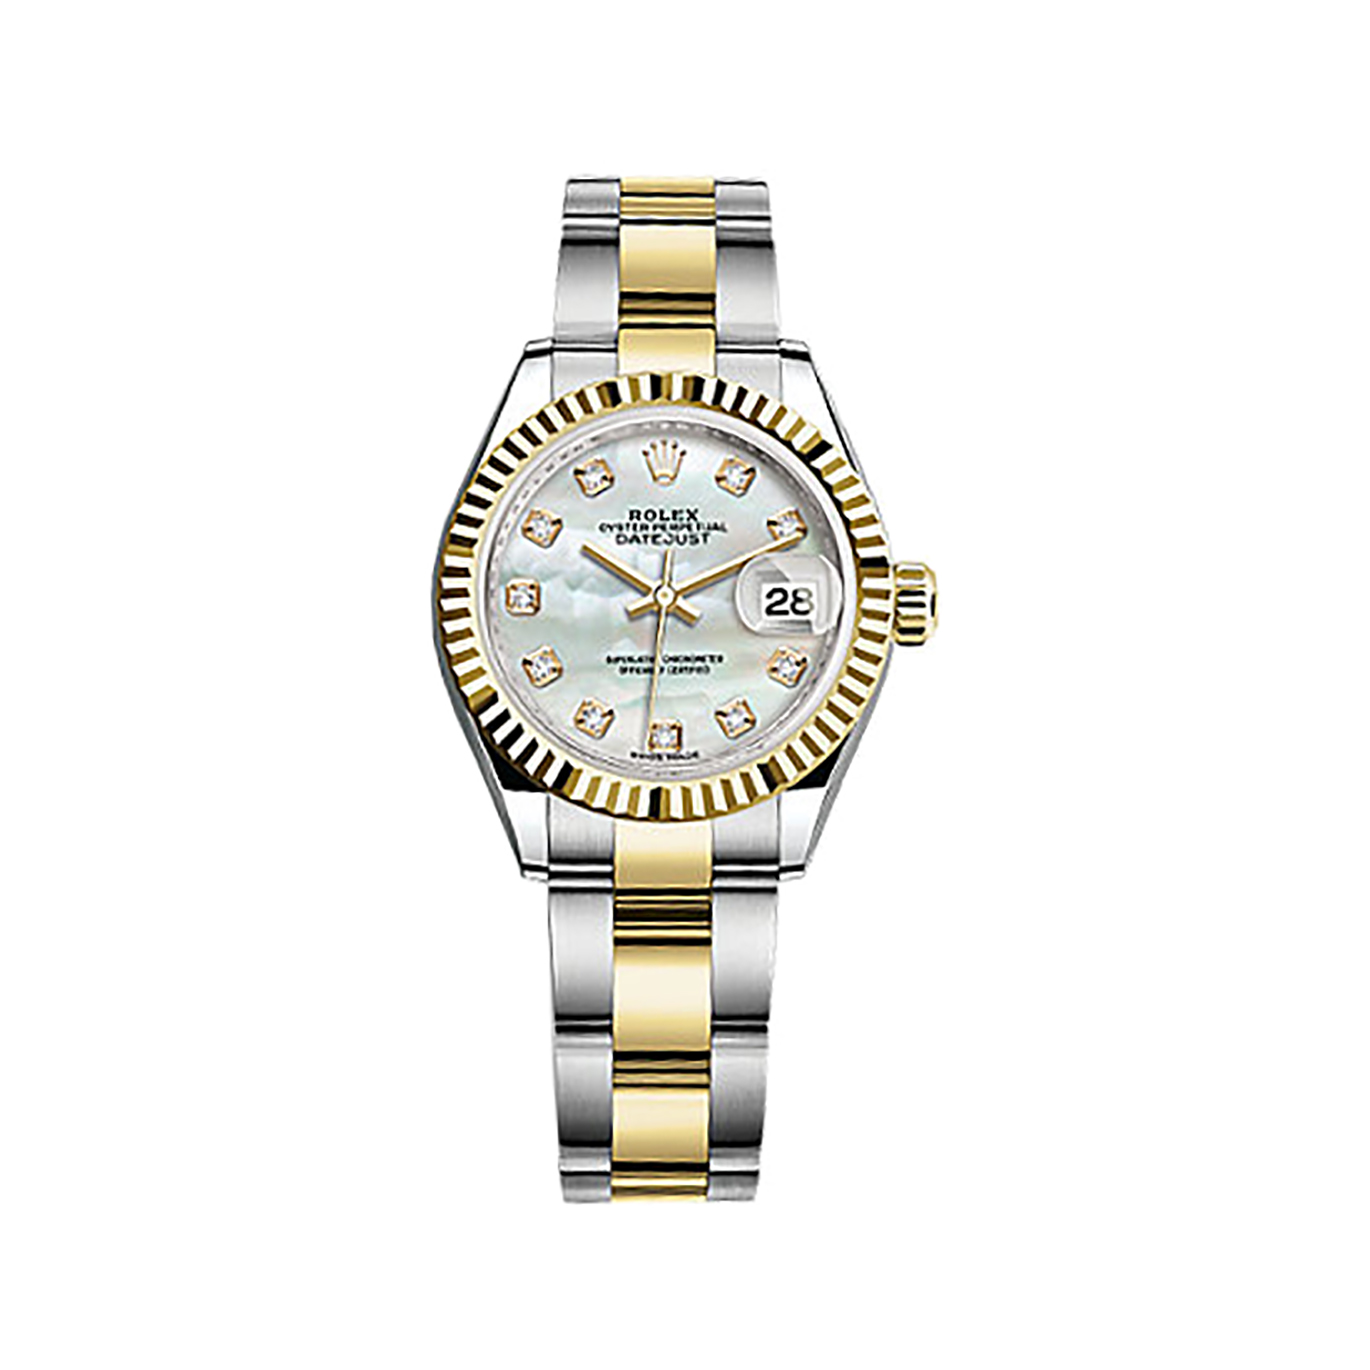 Lady-Datejust 28 279173 Gold & Stainless Steel Watch (White Mother-of-pearl Set with Diamonds)